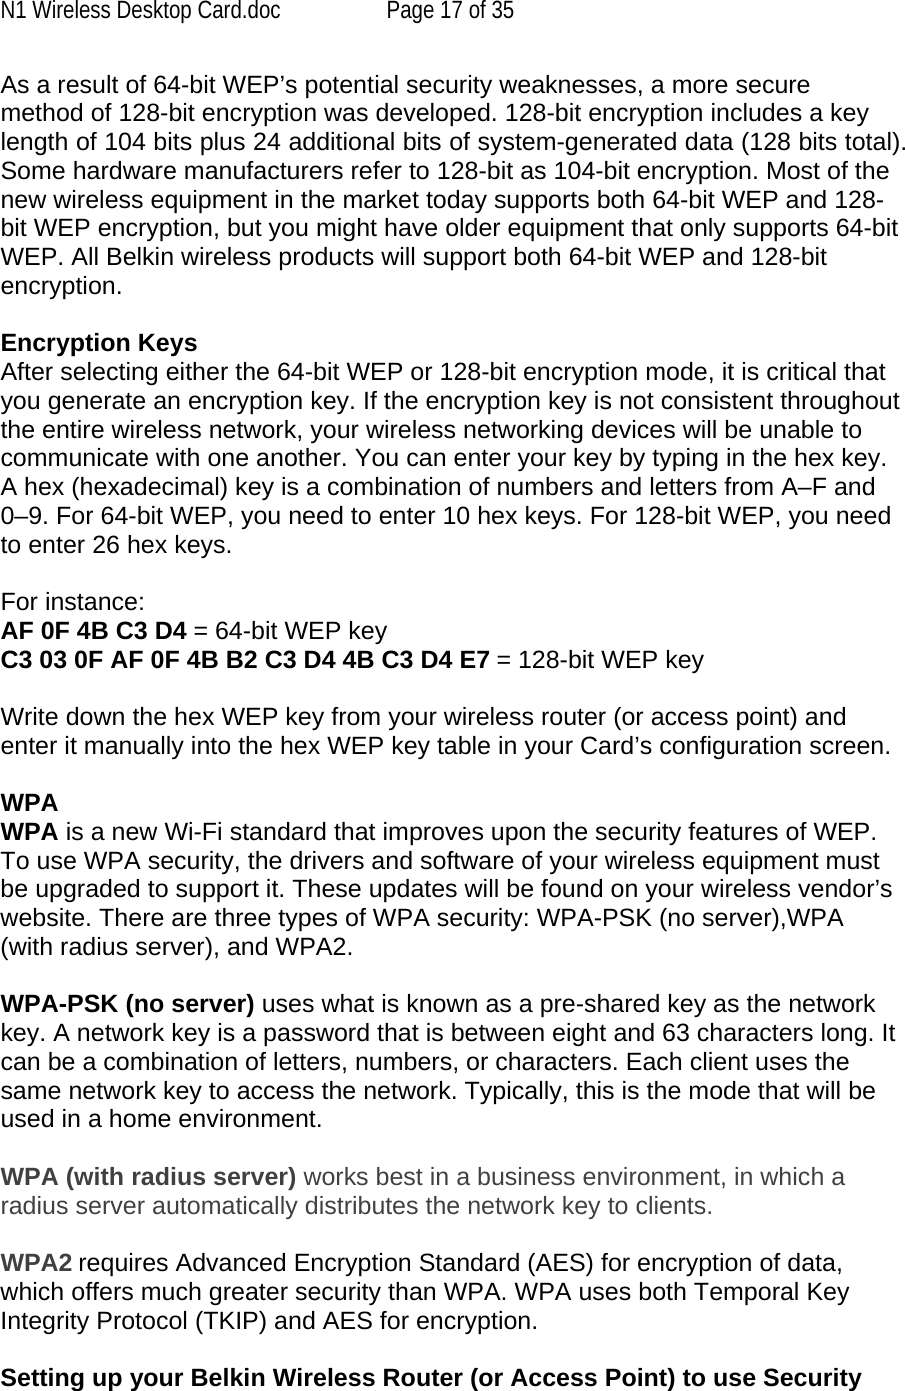 N1 Wireless Desktop Card.doc  Page 17 of 35 As a result of 64-bit WEP’s potential security weaknesses, a more secure method of 128-bit encryption was developed. 128-bit encryption includes a key length of 104 bits plus 24 additional bits of system-generated data (128 bits total). Some hardware manufacturers refer to 128-bit as 104-bit encryption. Most of the new wireless equipment in the market today supports both 64-bit WEP and 128-bit WEP encryption, but you might have older equipment that only supports 64-bit WEP. All Belkin wireless products will support both 64-bit WEP and 128-bit encryption.   Encryption Keys  After selecting either the 64-bit WEP or 128-bit encryption mode, it is critical that you generate an encryption key. If the encryption key is not consistent throughout the entire wireless network, your wireless networking devices will be unable to communicate with one another. You can enter your key by typing in the hex key. A hex (hexadecimal) key is a combination of numbers and letters from A–F and 0–9. For 64-bit WEP, you need to enter 10 hex keys. For 128-bit WEP, you need to enter 26 hex keys.   For instance:  AF 0F 4B C3 D4 = 64-bit WEP key  C3 03 0F AF 0F 4B B2 C3 D4 4B C3 D4 E7 = 128-bit WEP key   Write down the hex WEP key from your wireless router (or access point) and enter it manually into the hex WEP key table in your Card’s configuration screen.  WPA  WPA is a new Wi-Fi standard that improves upon the security features of WEP. To use WPA security, the drivers and software of your wireless equipment must be upgraded to support it. These updates will be found on your wireless vendor’s website. There are three types of WPA security: WPA-PSK (no server),WPA (with radius server), and WPA2.  WPA-PSK (no server) uses what is known as a pre-shared key as the network key. A network key is a password that is between eight and 63 characters long. It can be a combination of letters, numbers, or characters. Each client uses the same network key to access the network. Typically, this is the mode that will be used in a home environment.   WPA (with radius server) works best in a business environment, in which a radius server automatically distributes the network key to clients.   WPA2 requires Advanced Encryption Standard (AES) for encryption of data, which offers much greater security than WPA. WPA uses both Temporal Key Integrity Protocol (TKIP) and AES for encryption.  Setting up your Belkin Wireless Router (or Access Point) to use Security 